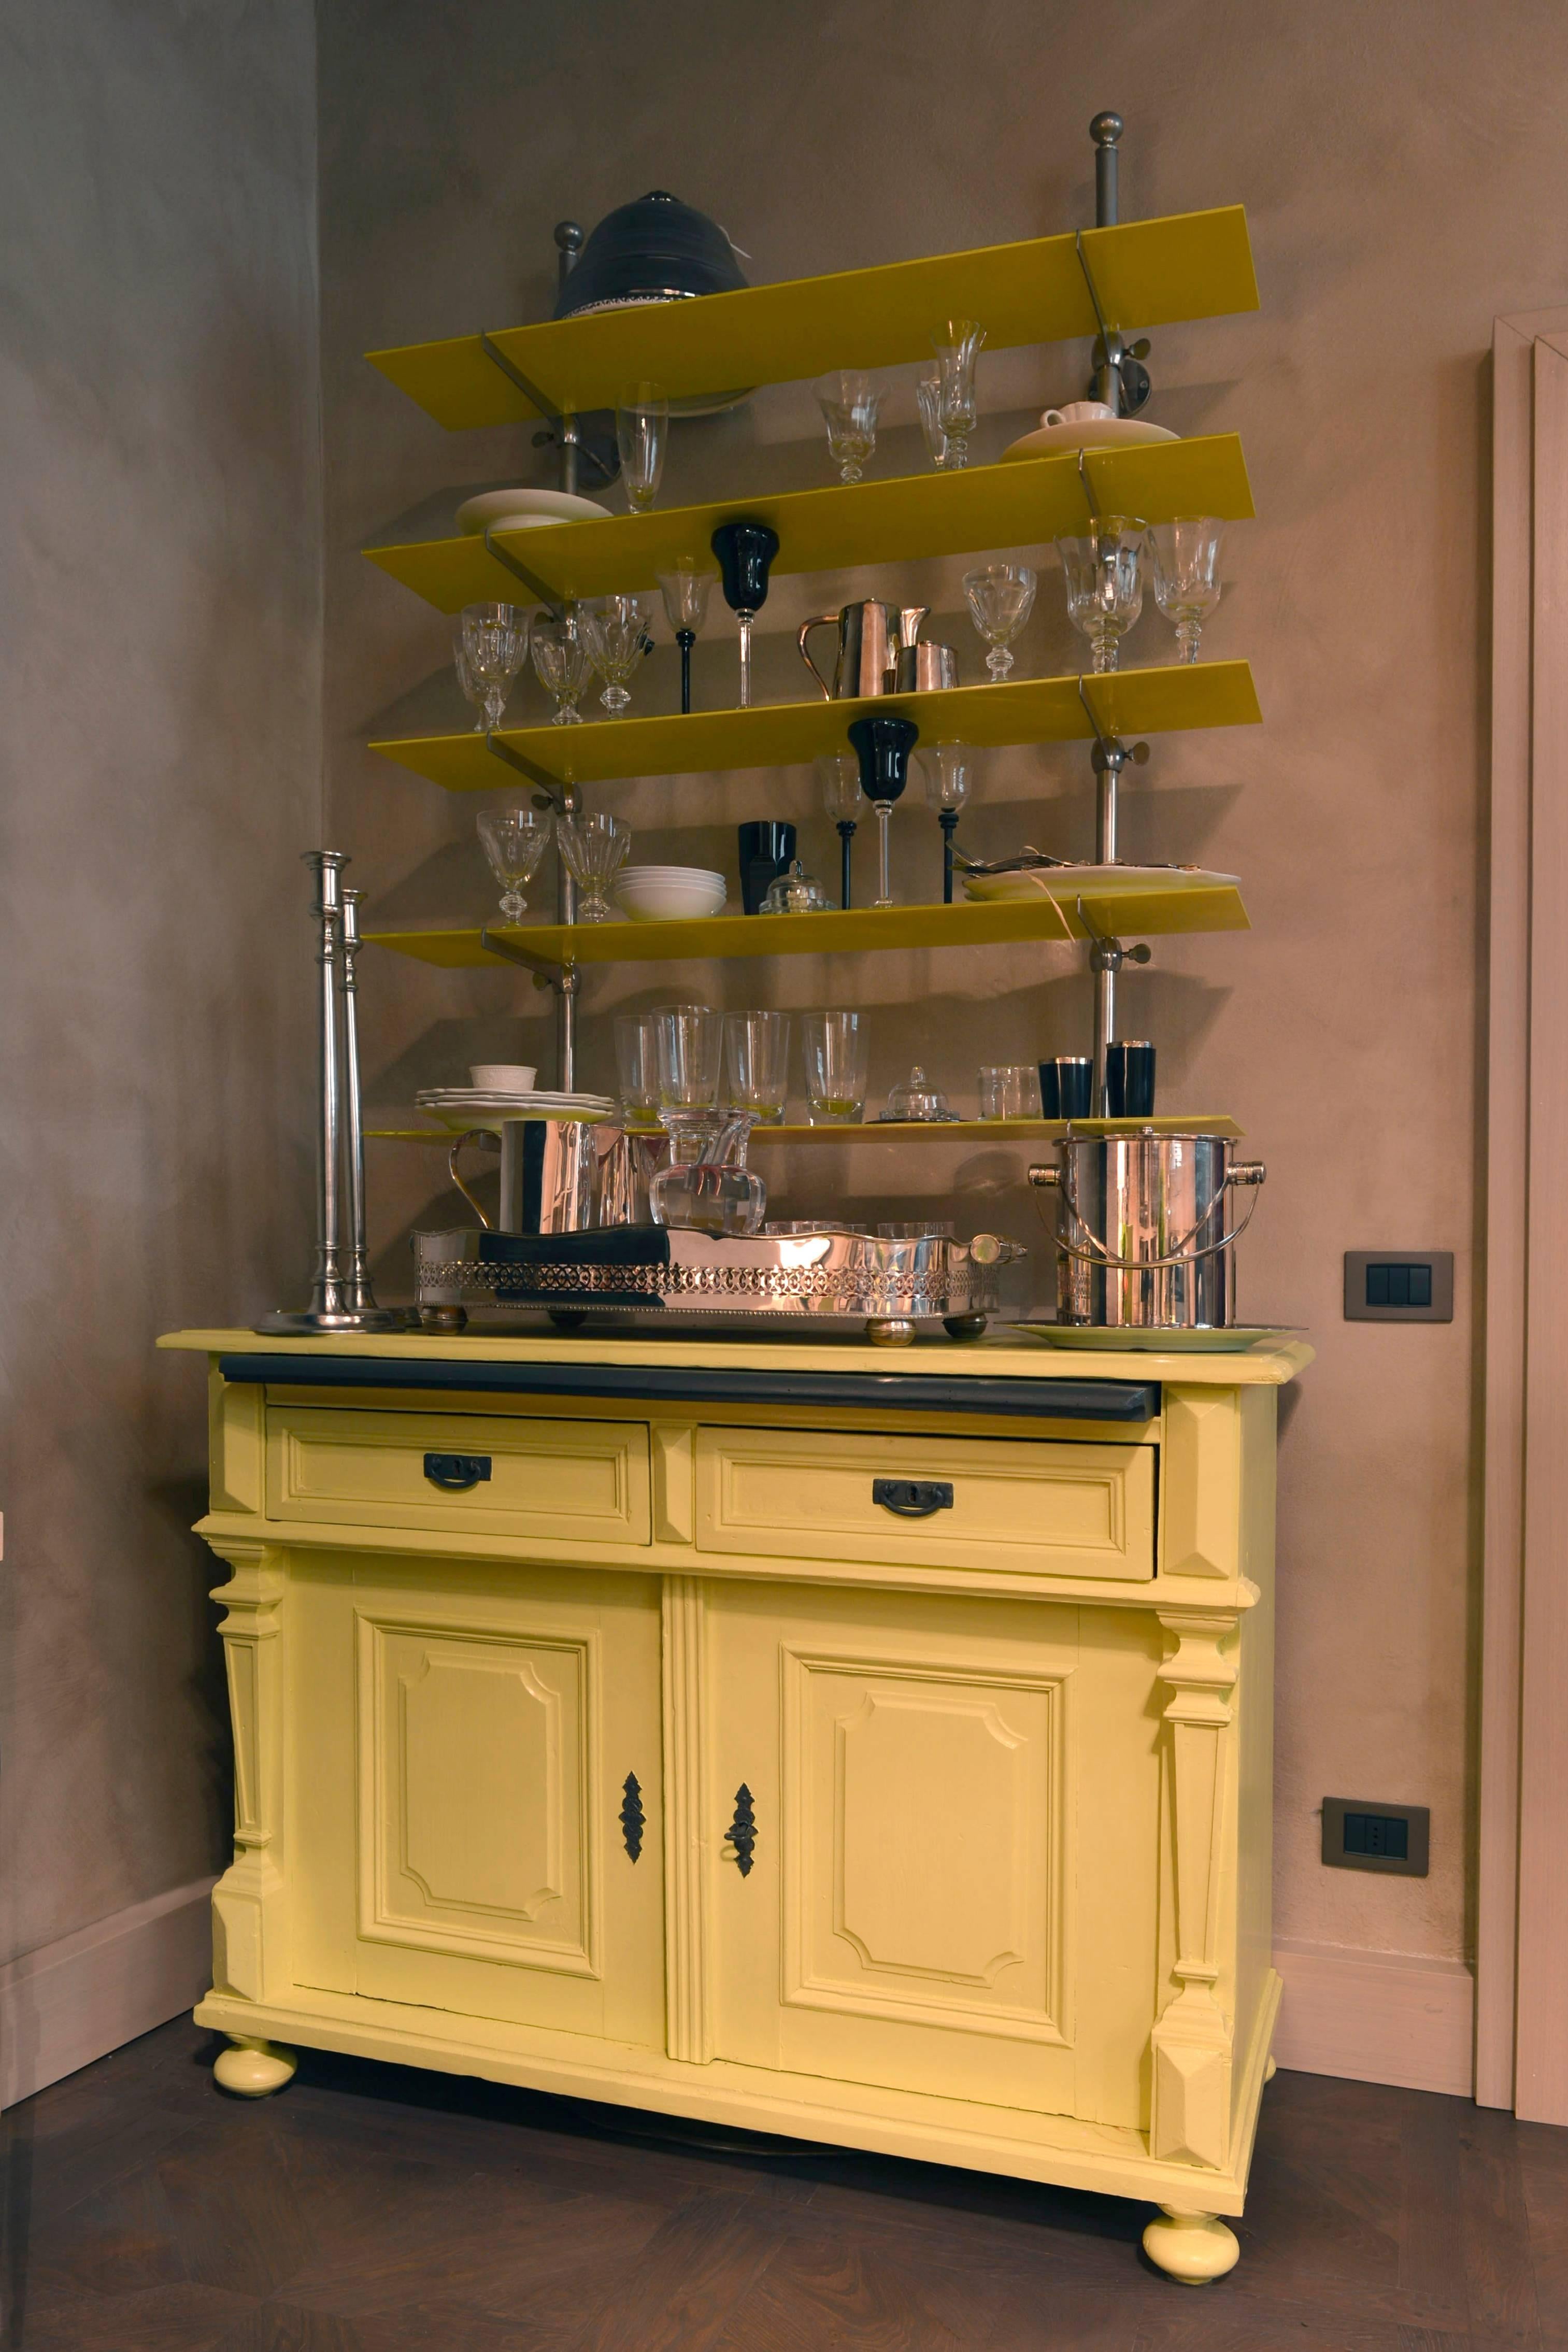 Italy Mid-19th Century yellow lacquered wood and glass shelves buffet in farmhouse style

This cheerful yellow wood lacquered buffet is composed by two part: the mid-19th  Century pine wood buffet, that it is  currently hand-lacquered in yellow